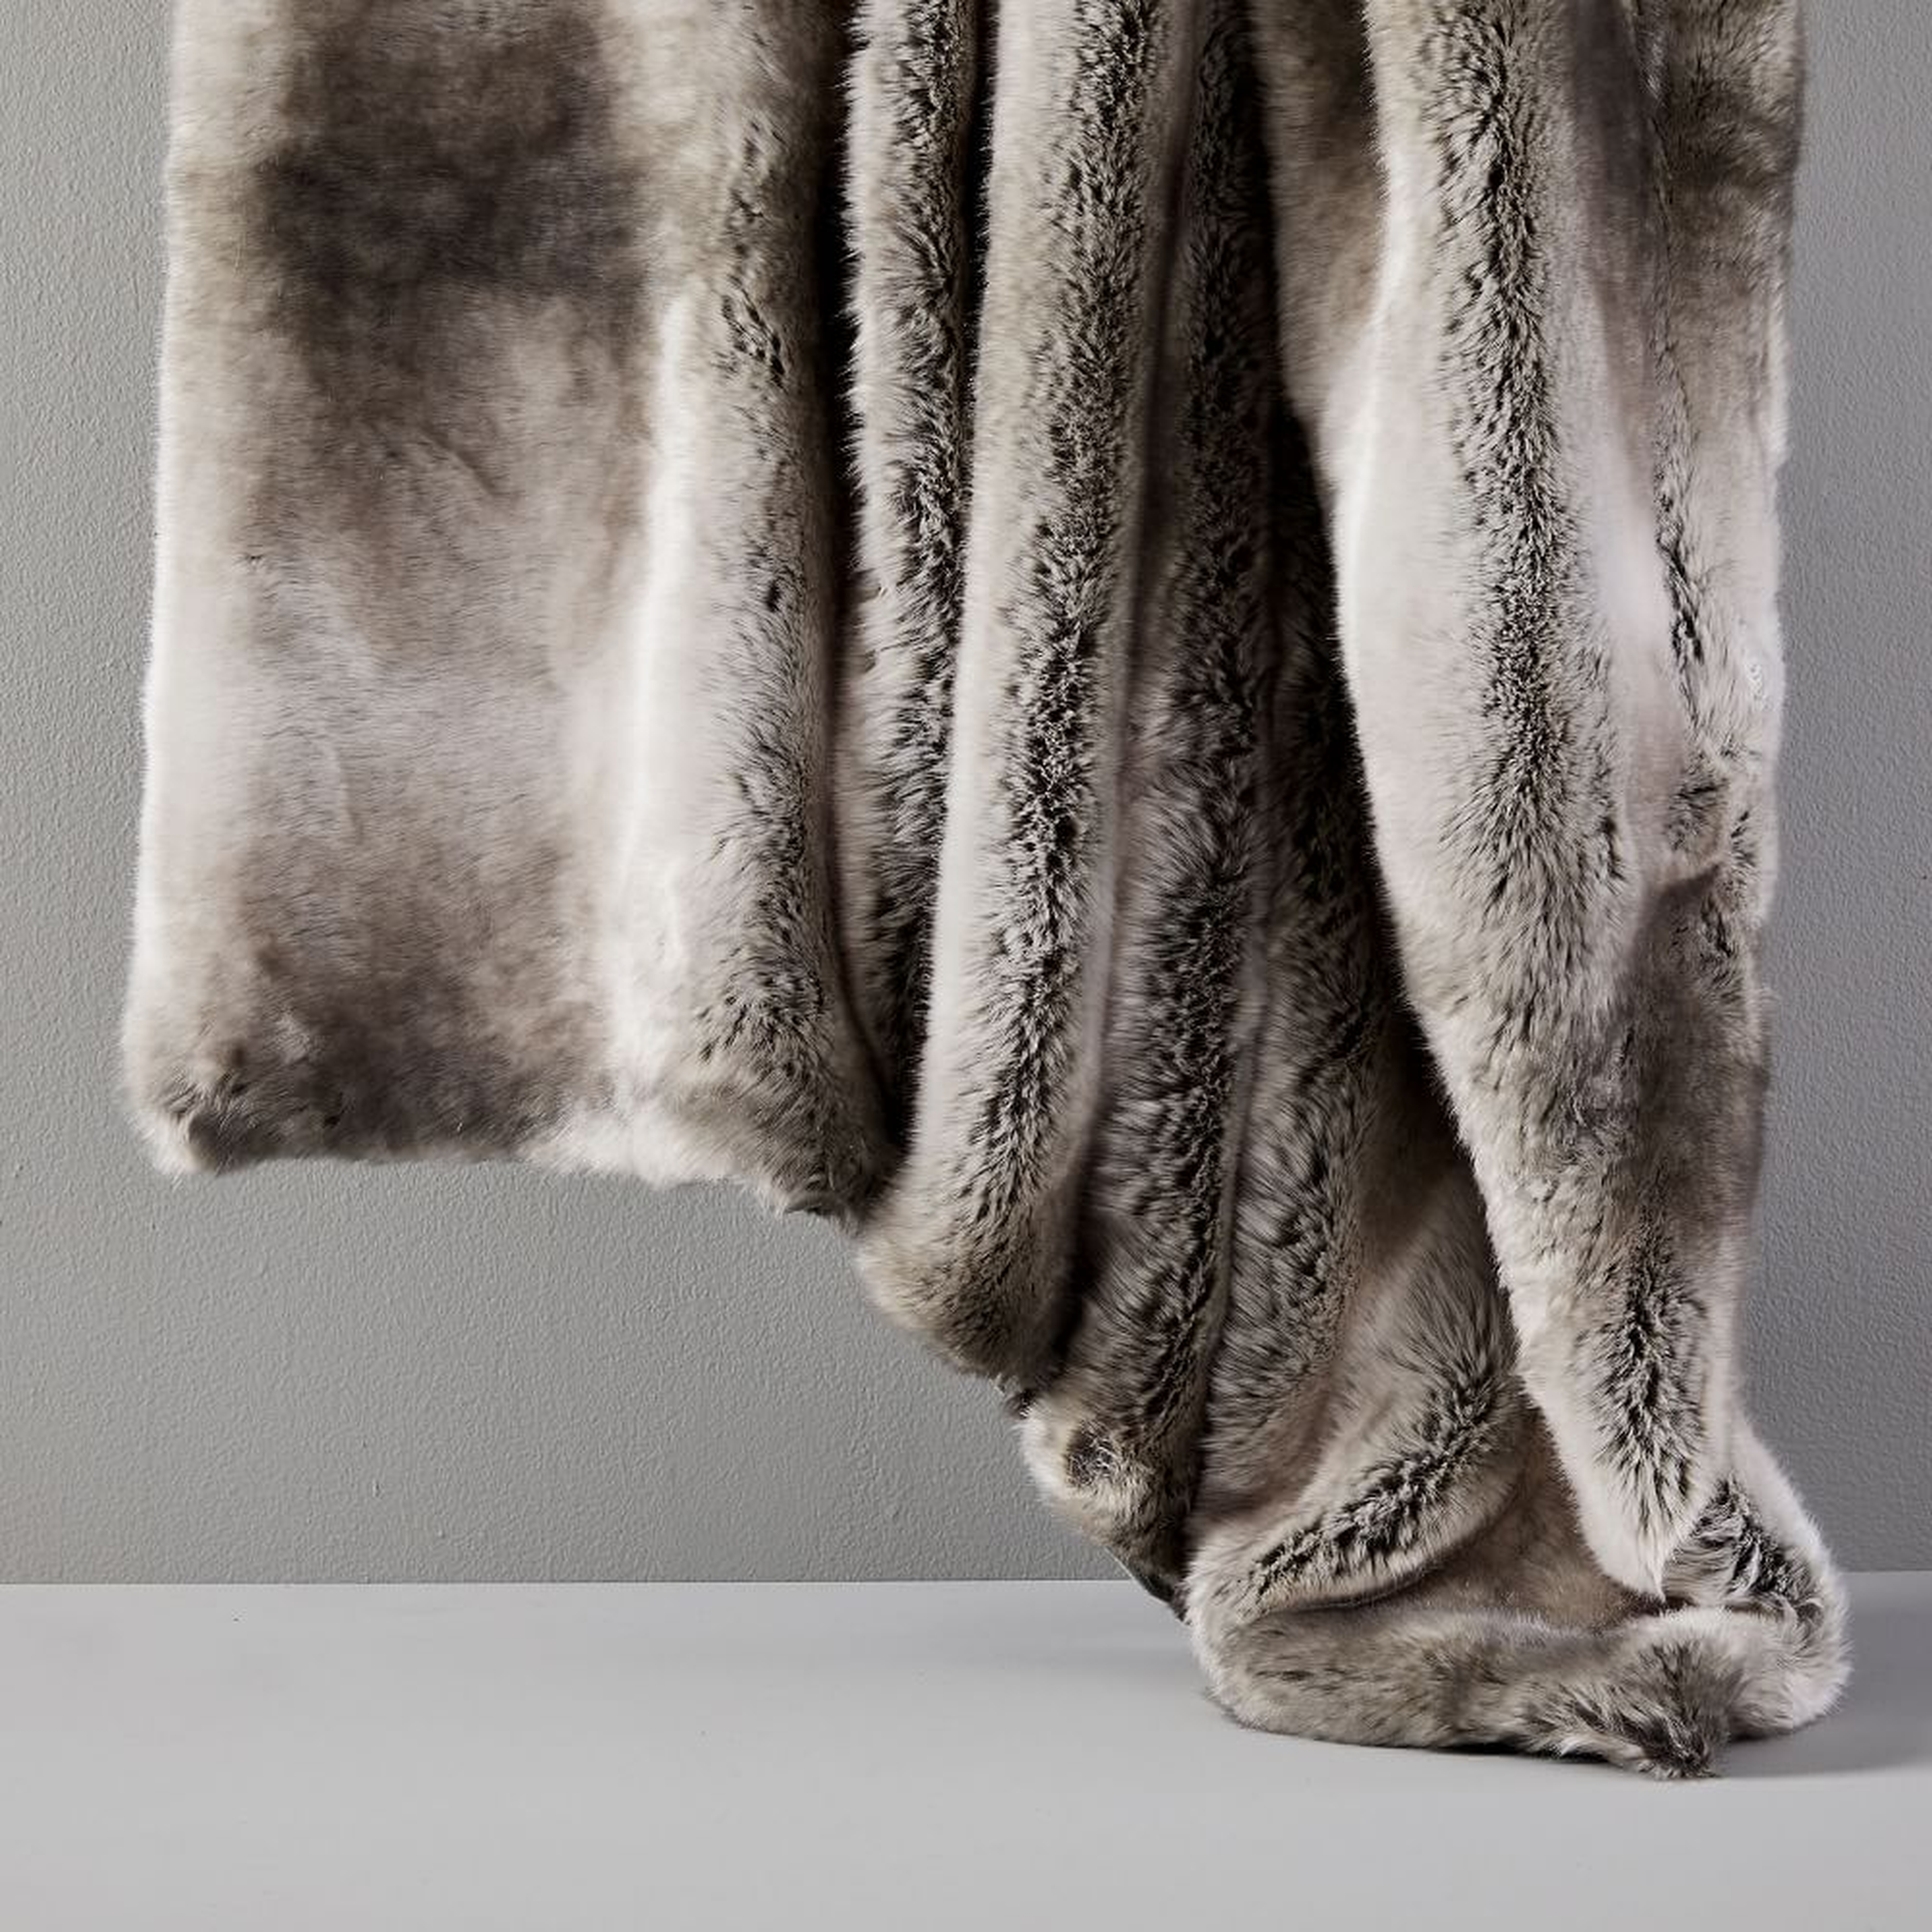 Faux Fur Ombre Throw, 60"x80", Feather Gray - West Elm